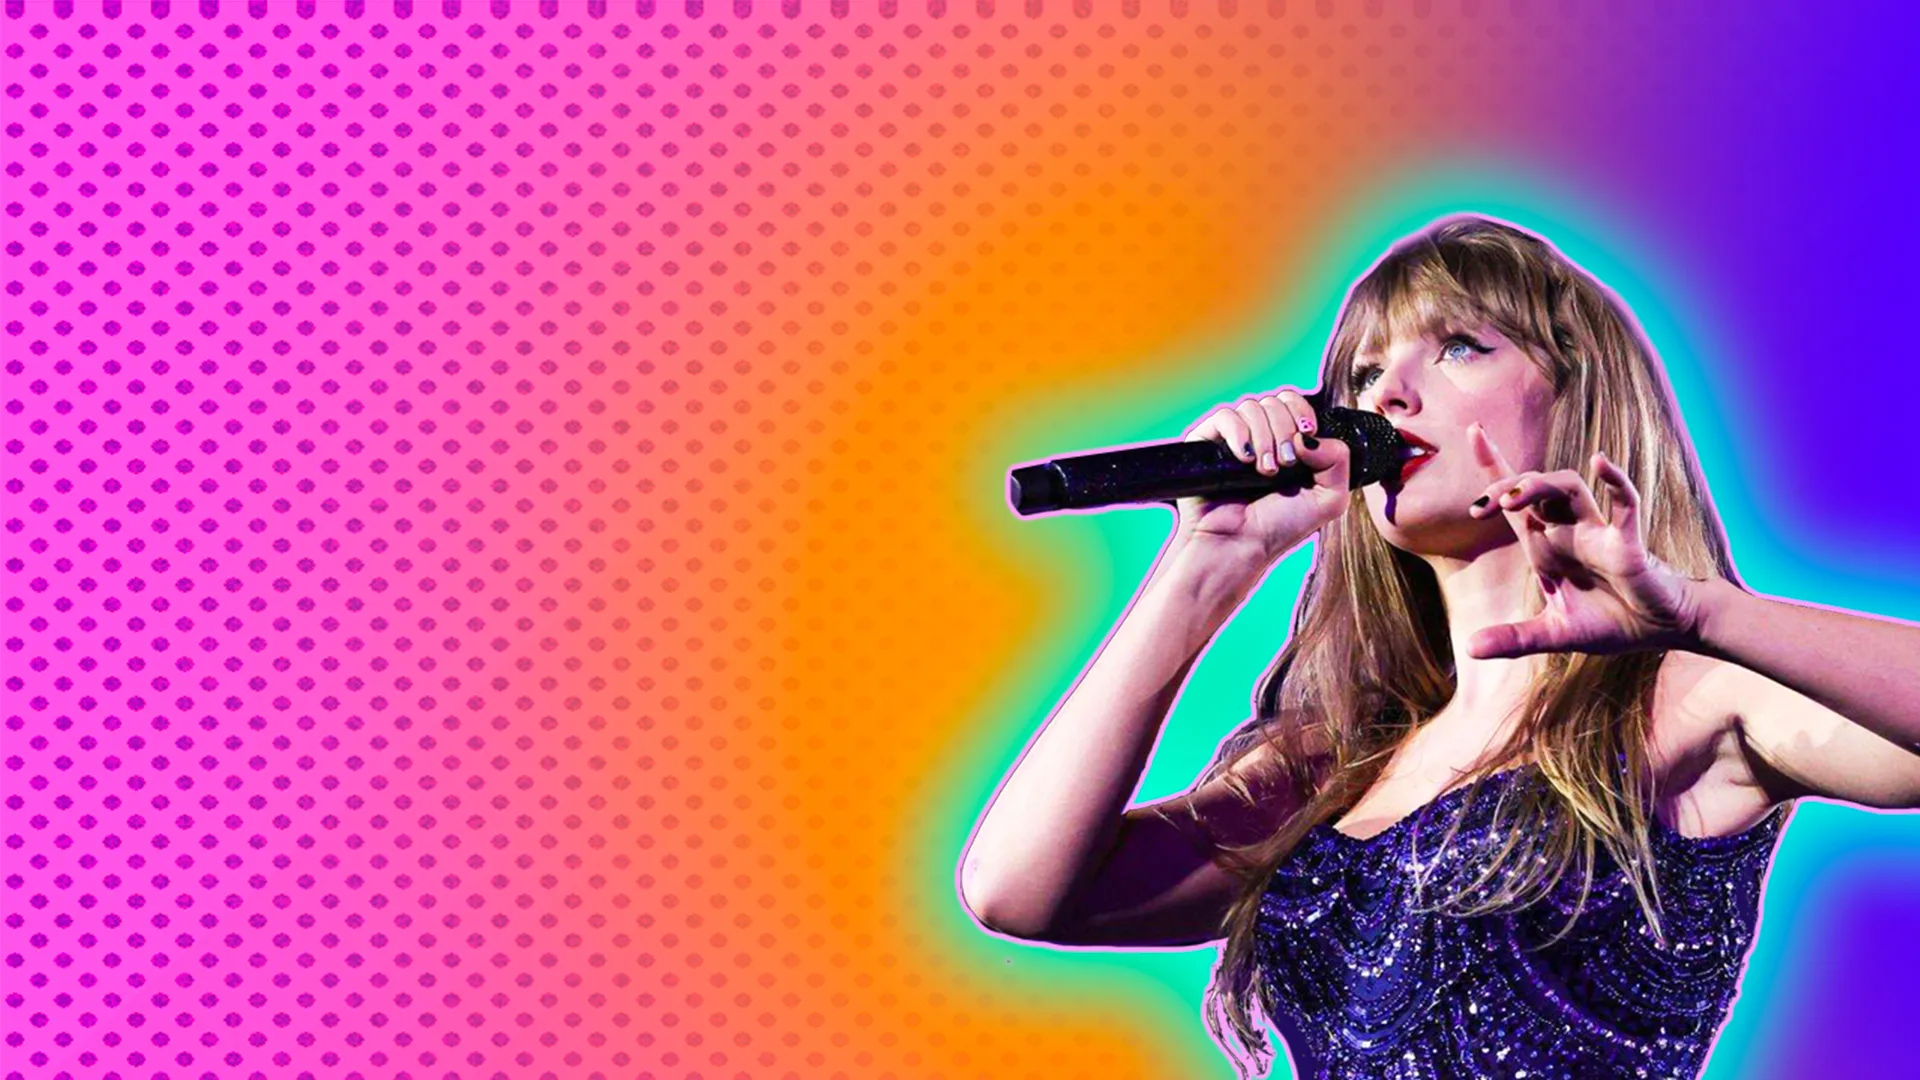 Cutout of Taylor Swift in blue sparkly bodysuit singing into microphone against a pink, orange and purple background